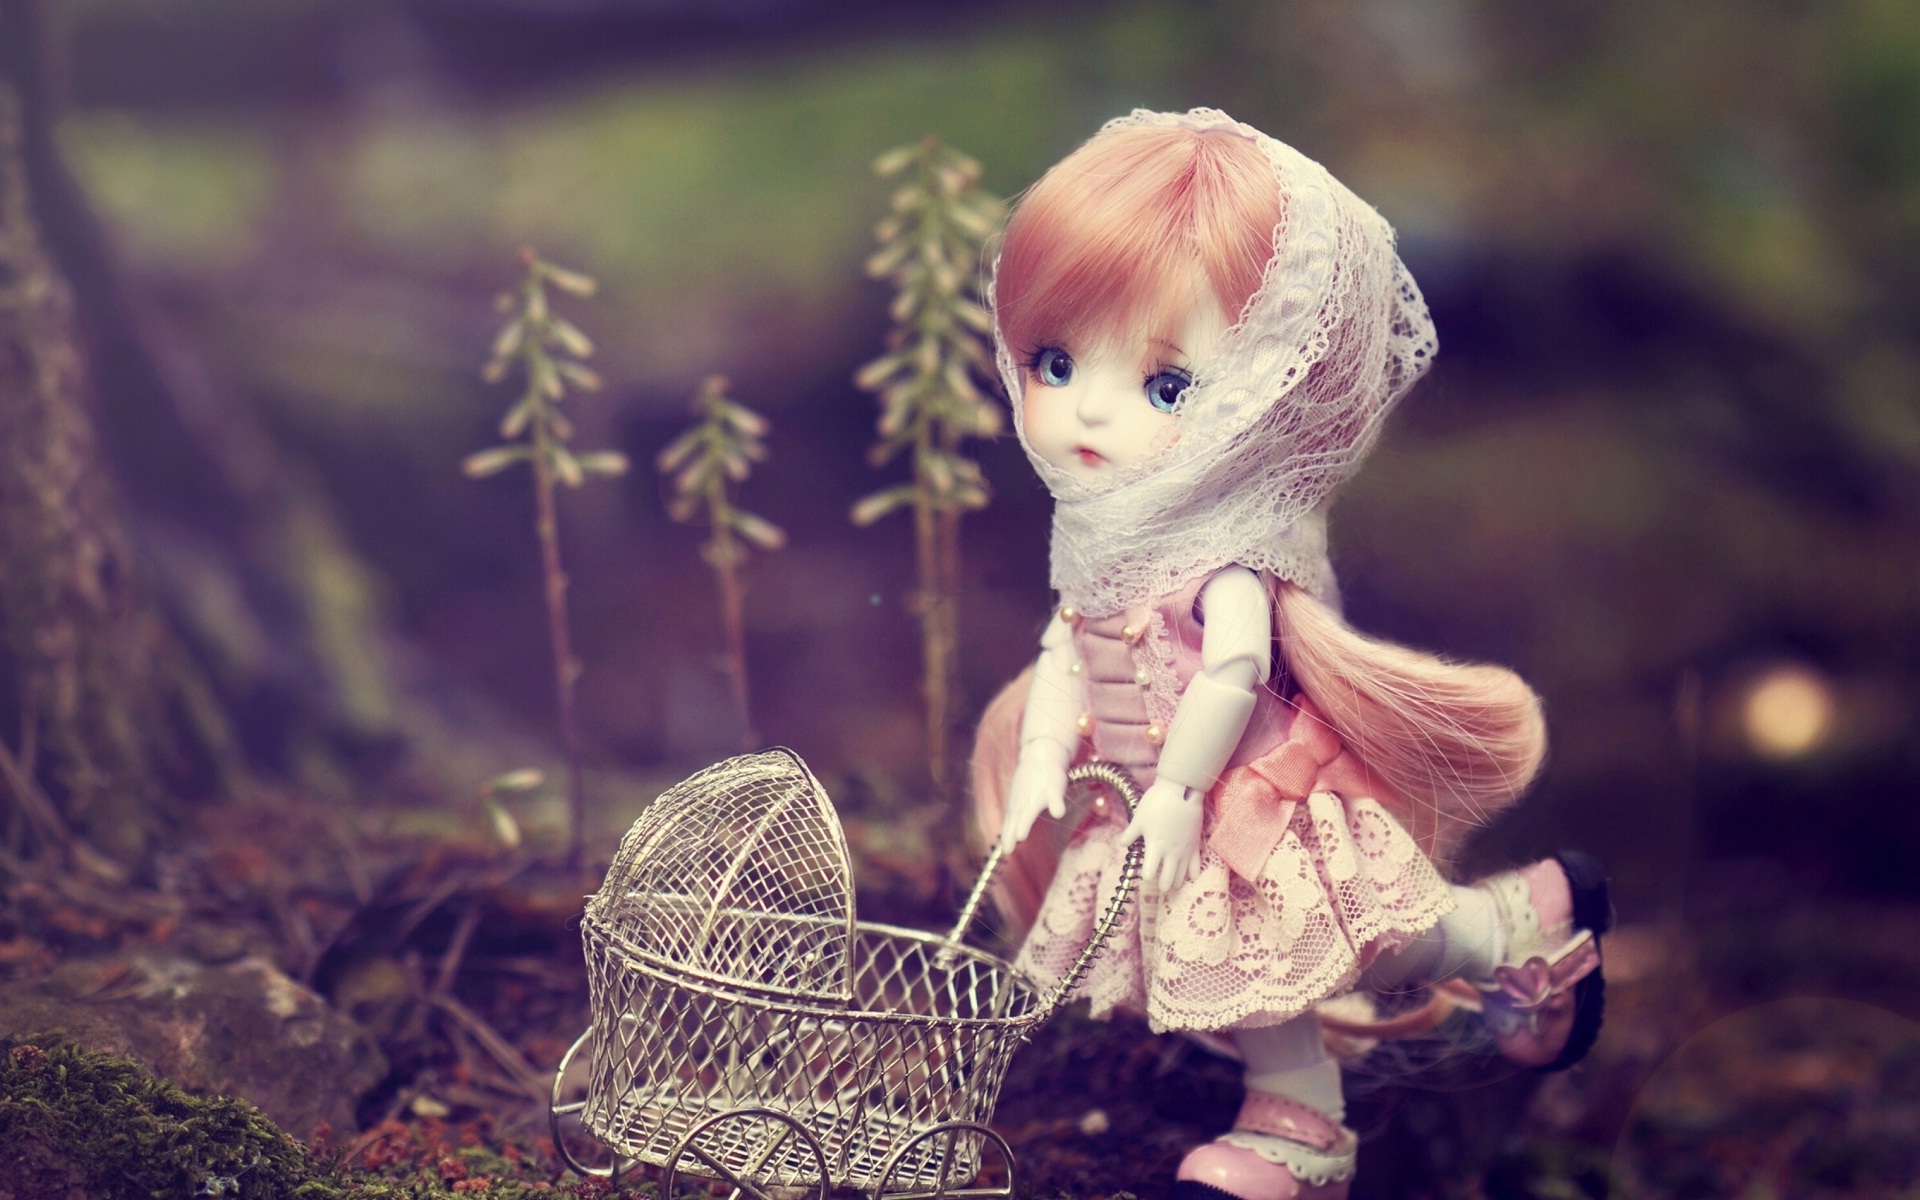 Cute and lovely doll | HD Wallpapers Rocks